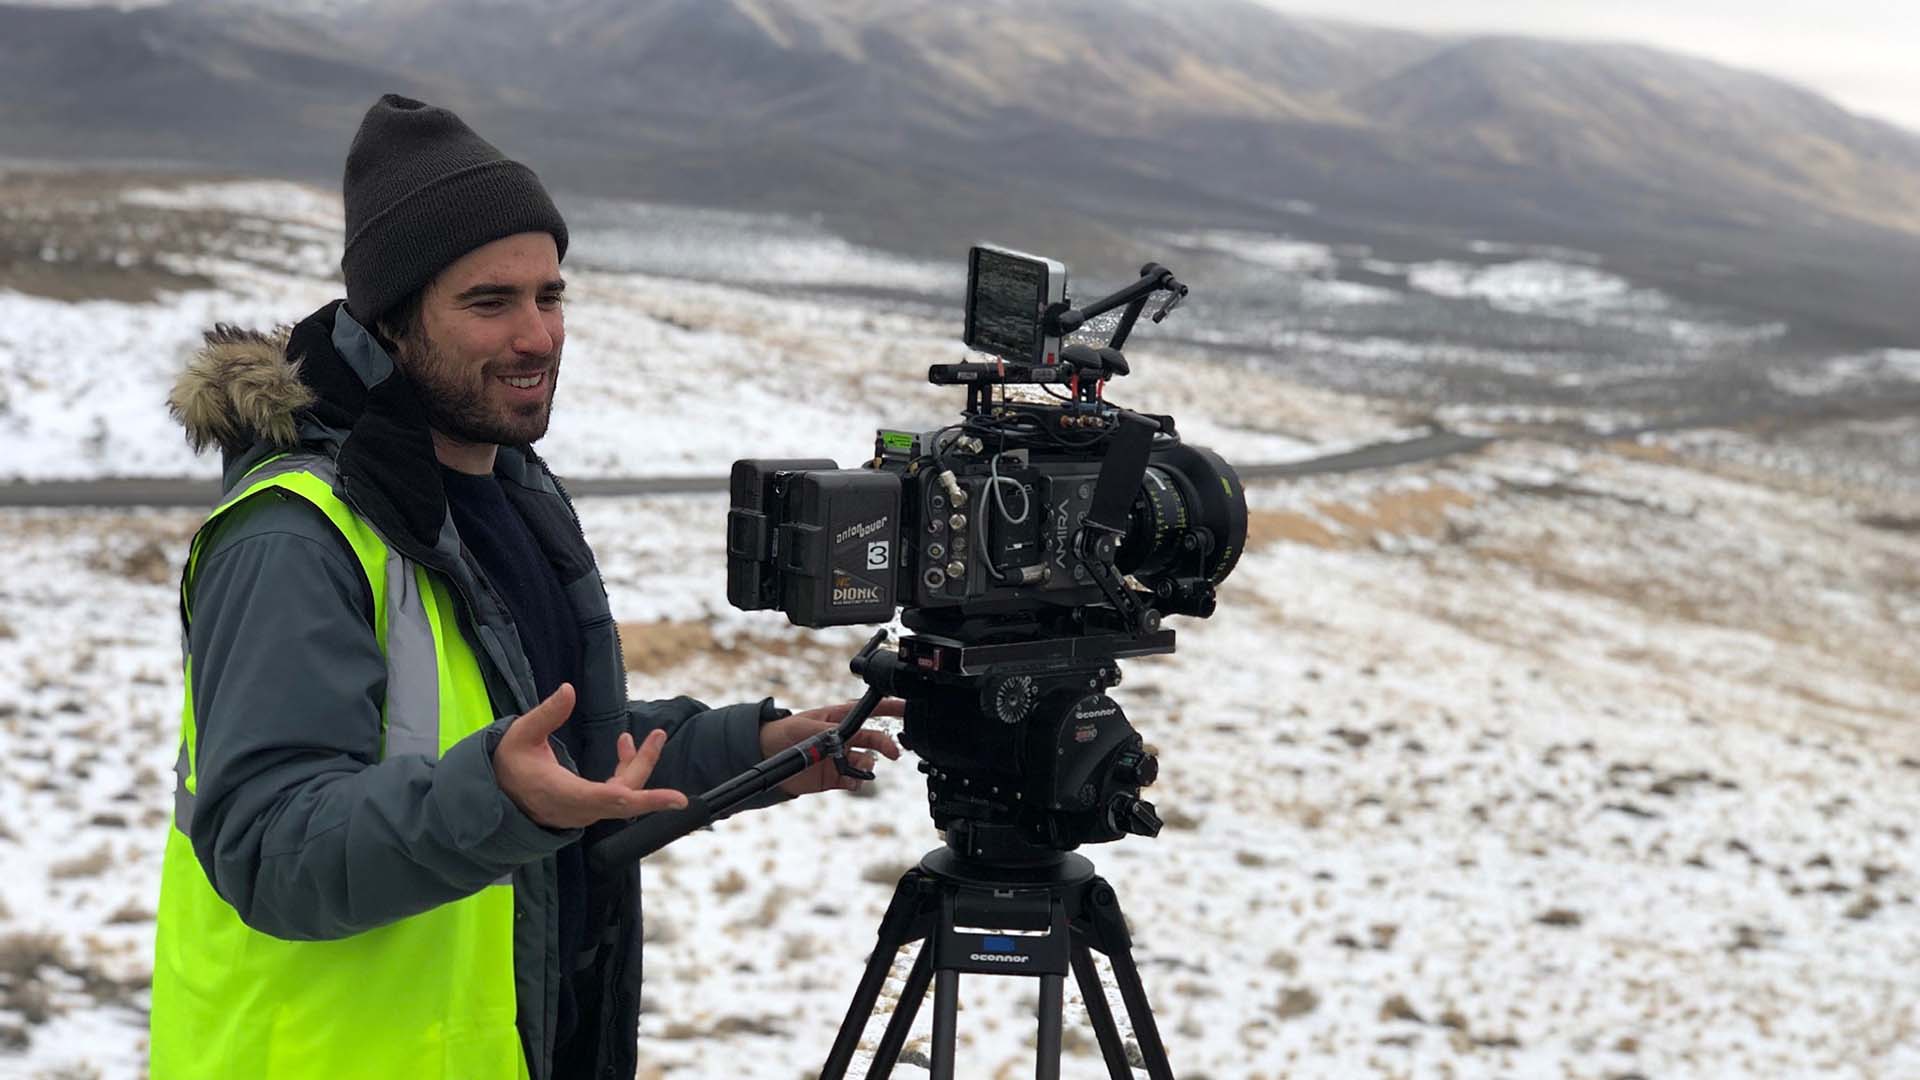 photo of the Nomadland's cinematographer, showing him, the camera on a tripod, and the snowy landscape in the background